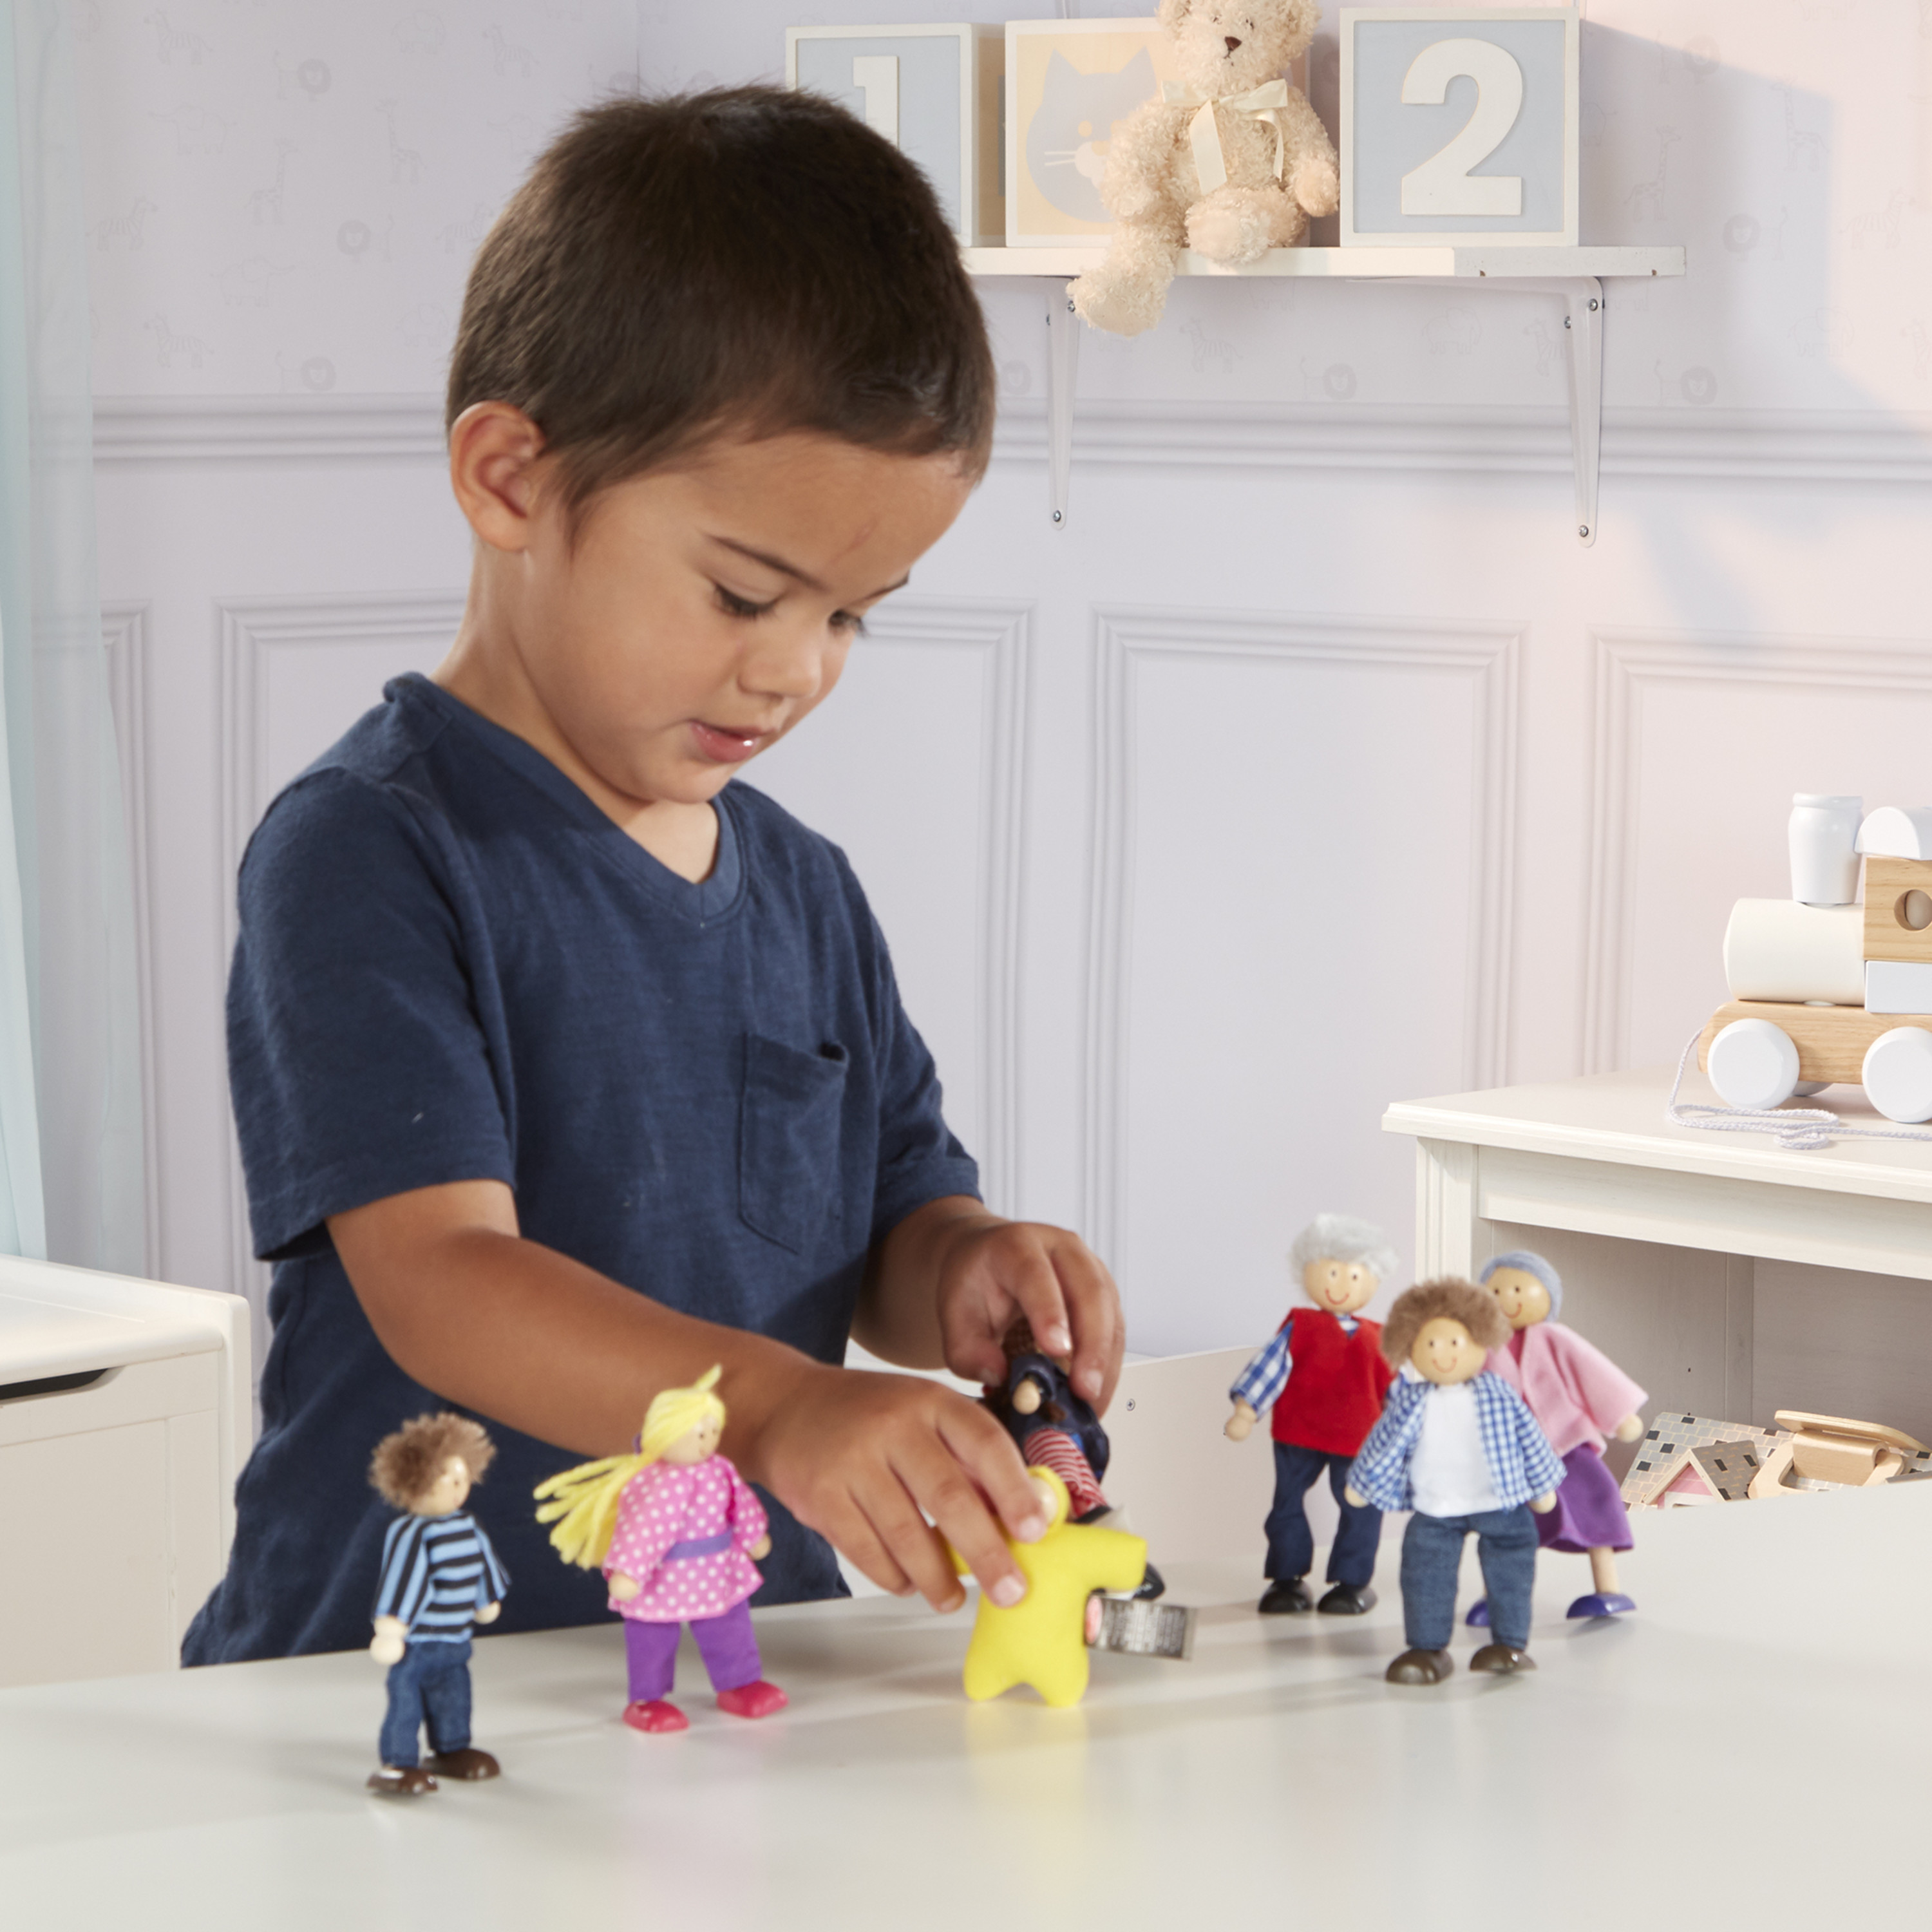 Melissa & Doug 7-Piece Poseable Wooden Doll Family for Dollhouse (2-4 inches each) - image 5 of 9